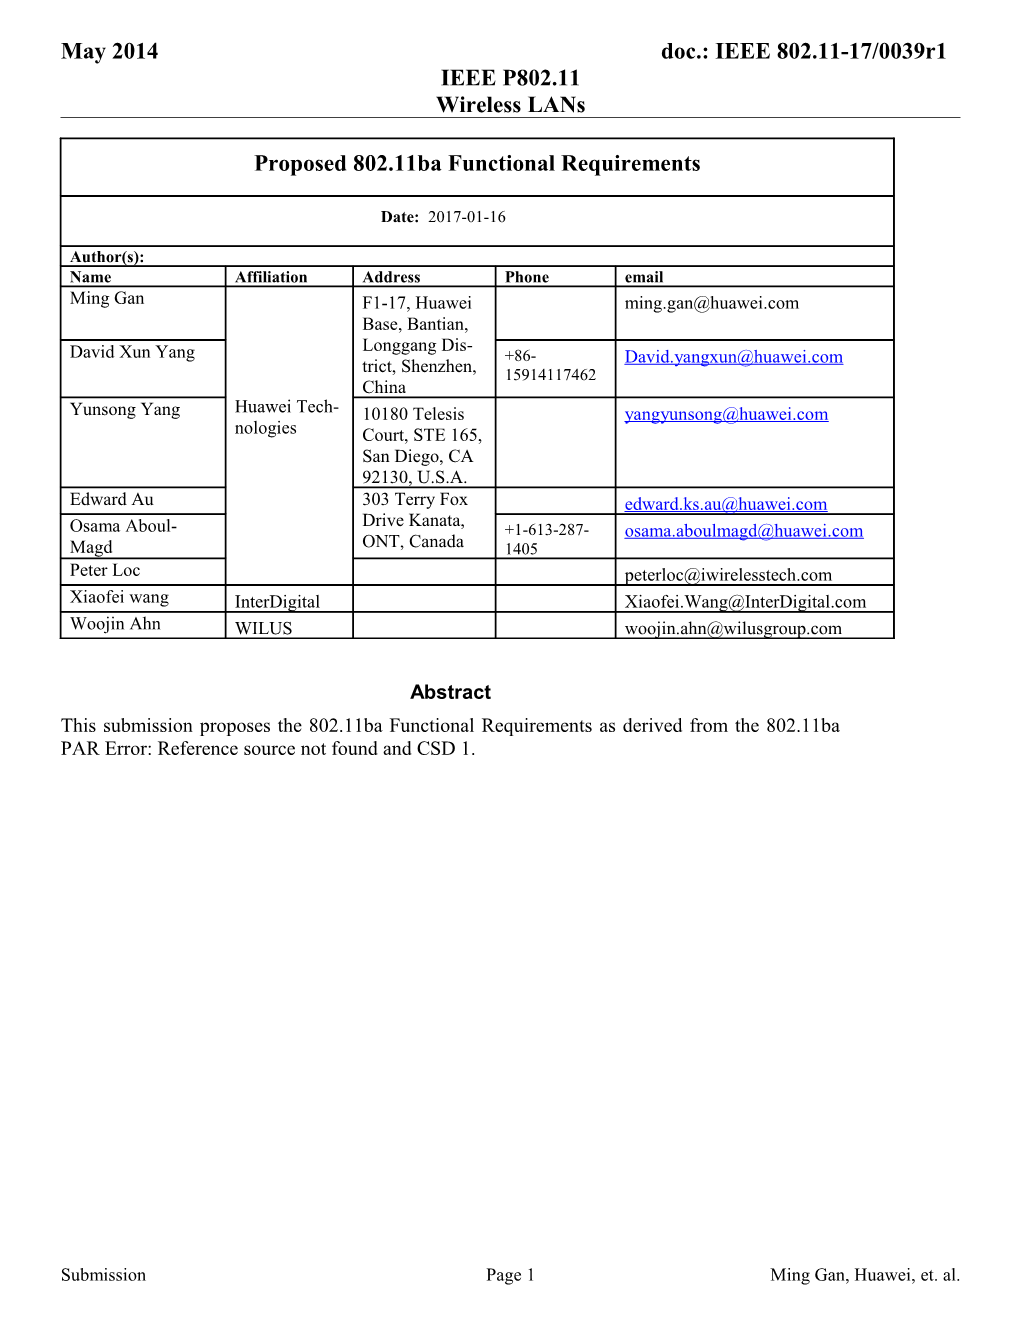 Proposed 802.11Ax Functional Requirements